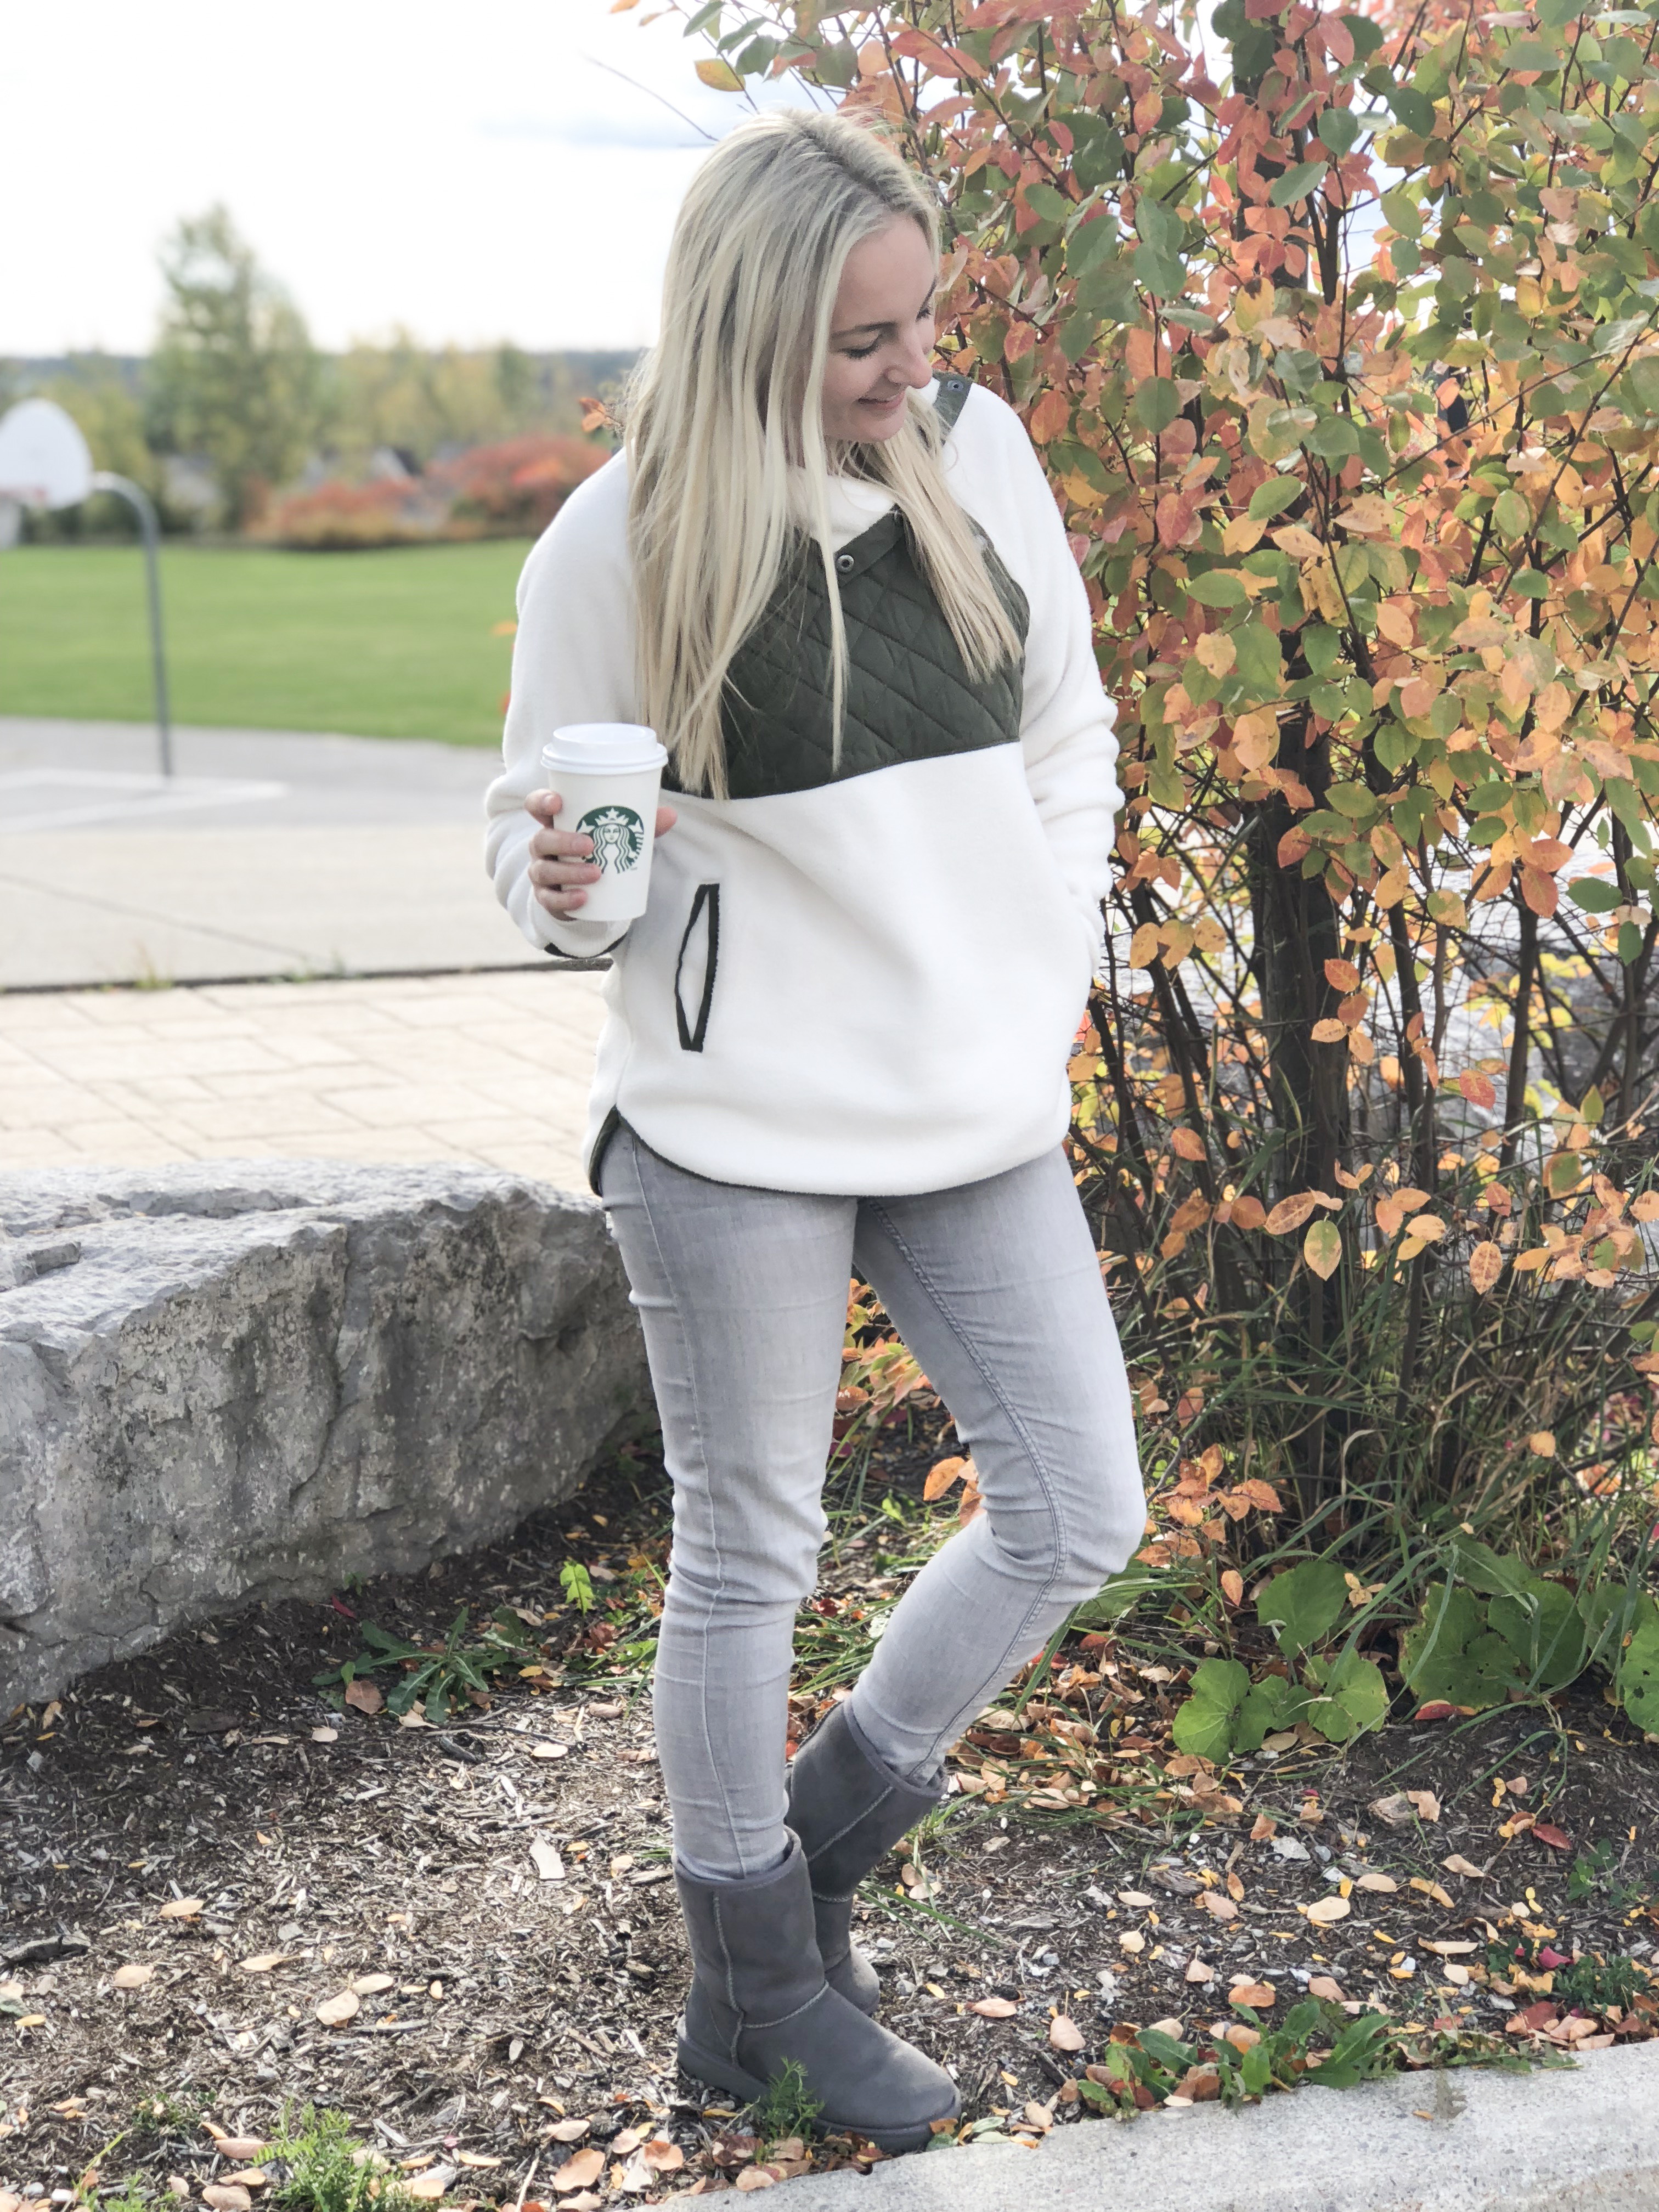 Abercrombie & Fitch Snap-Up Fleece Sweater on livin' life with style 